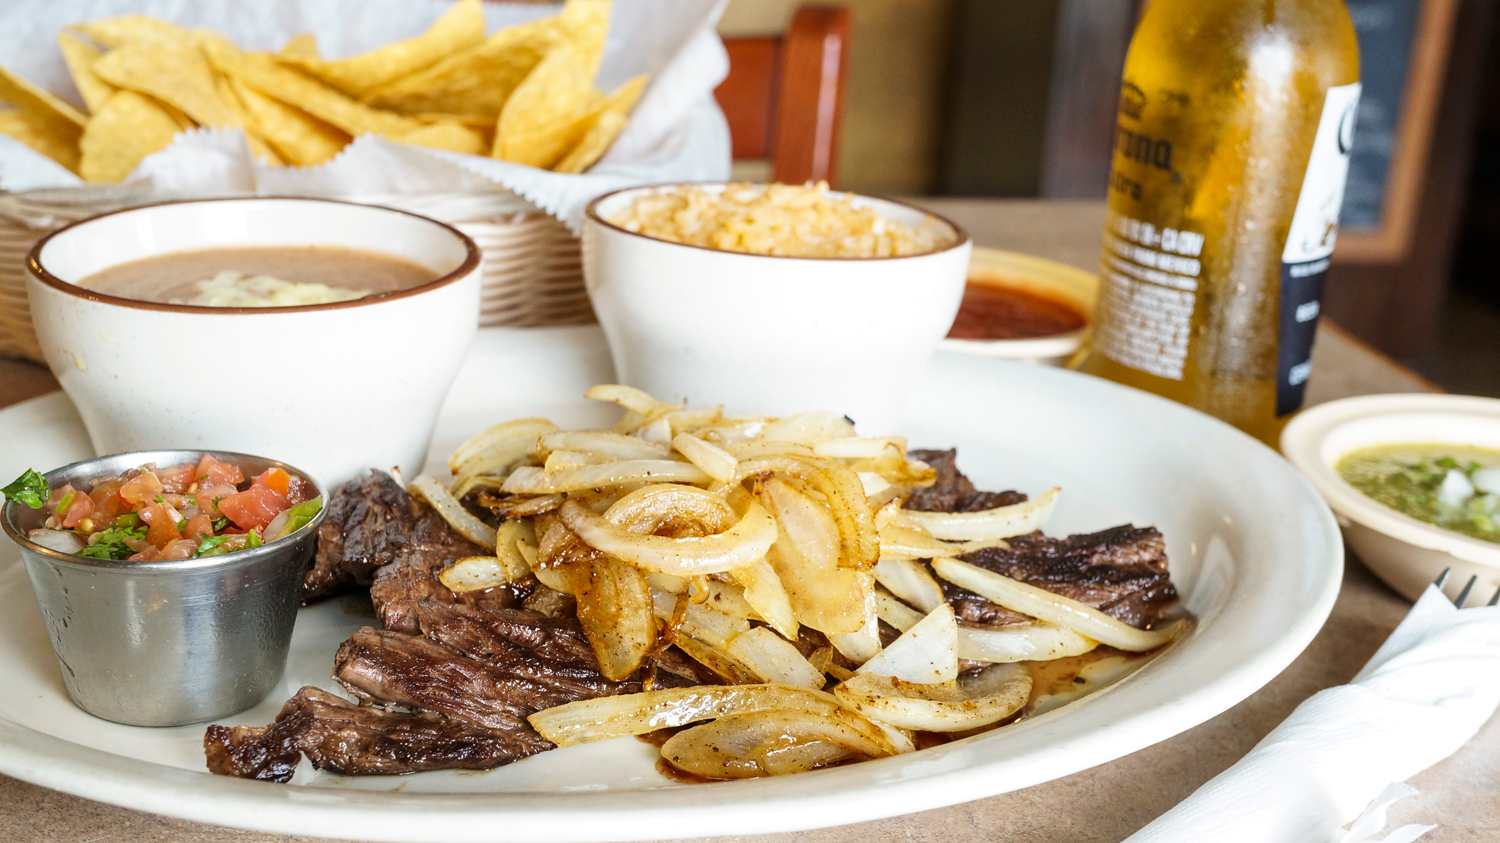 Carne Asada: Tender, grilled skirt steak, cooked to order. Served with rice, beans, grilled onions, pico de gallo and tortillas.